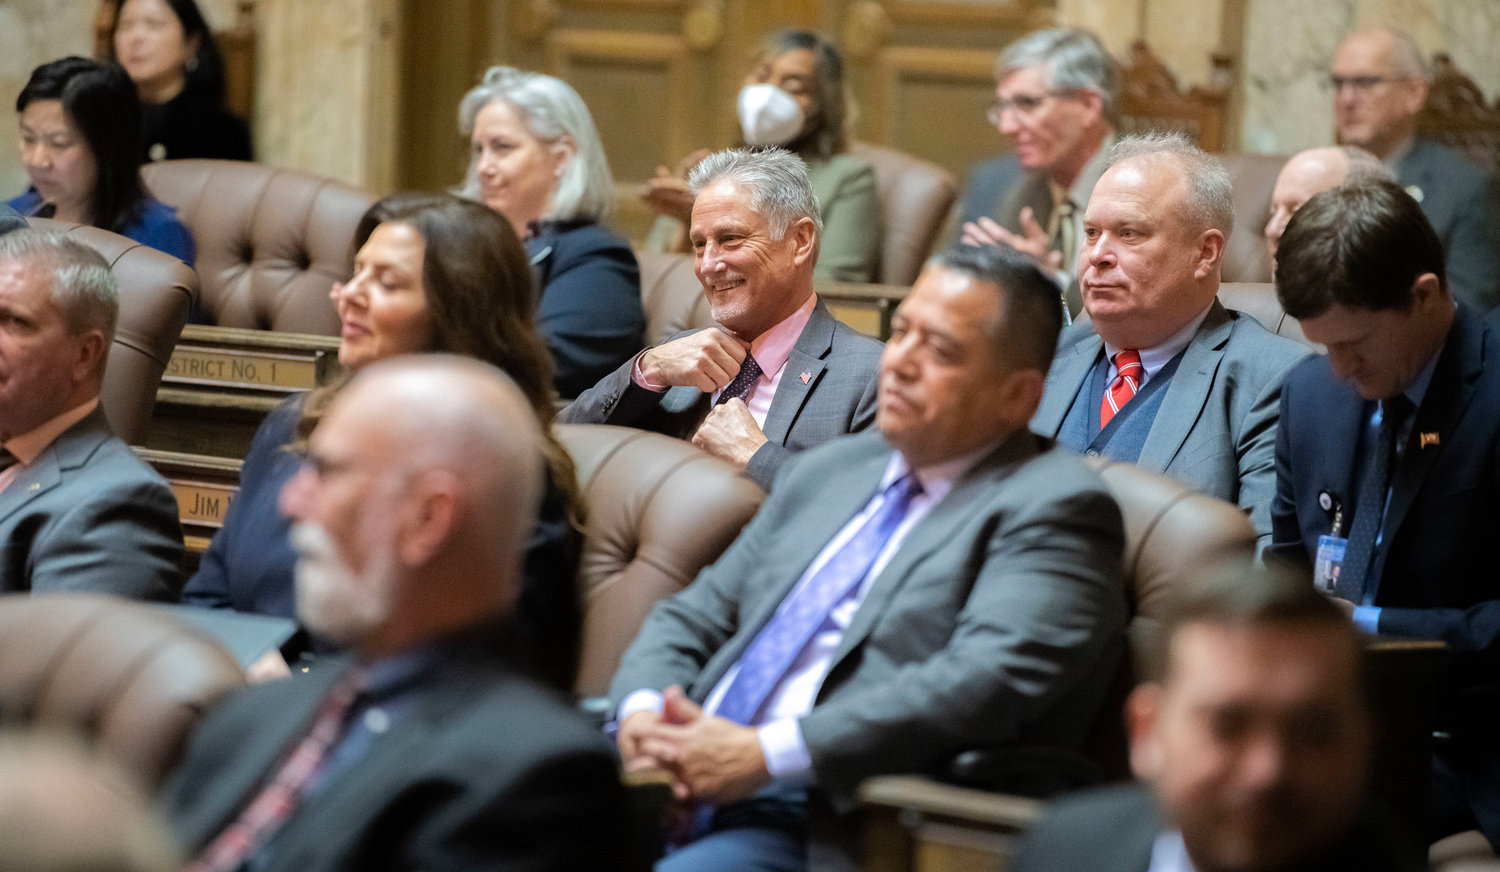 Senator Jeff Wilson smiles while attending Inlsee’s 2023 State of the State speech alongside State Rep. Jim Walsh Tuesday afternoon in Olympia.